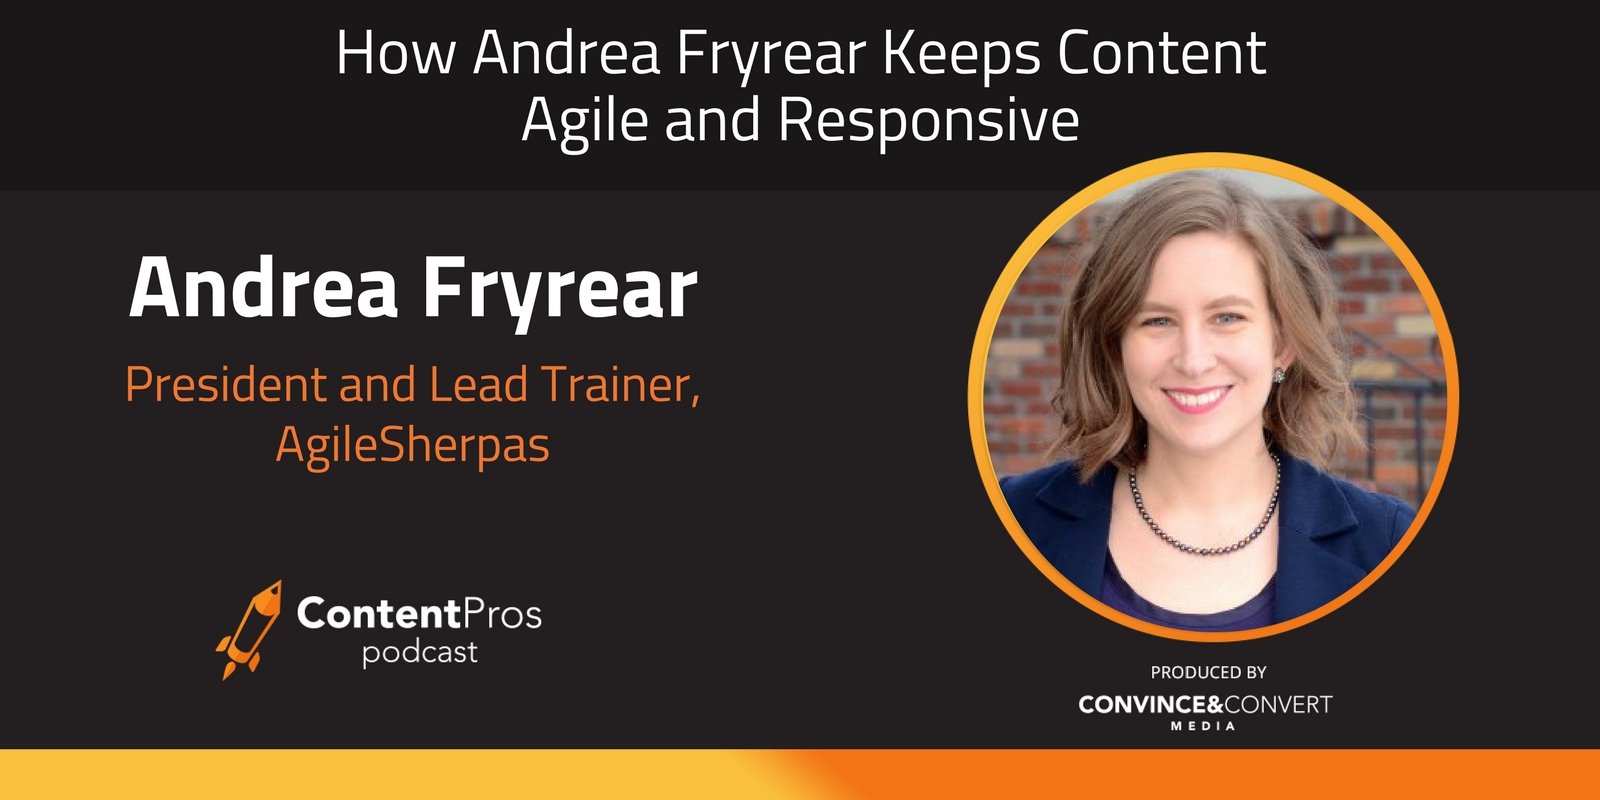 How Andrea Fryrear Keeps Content Agile and Responsive